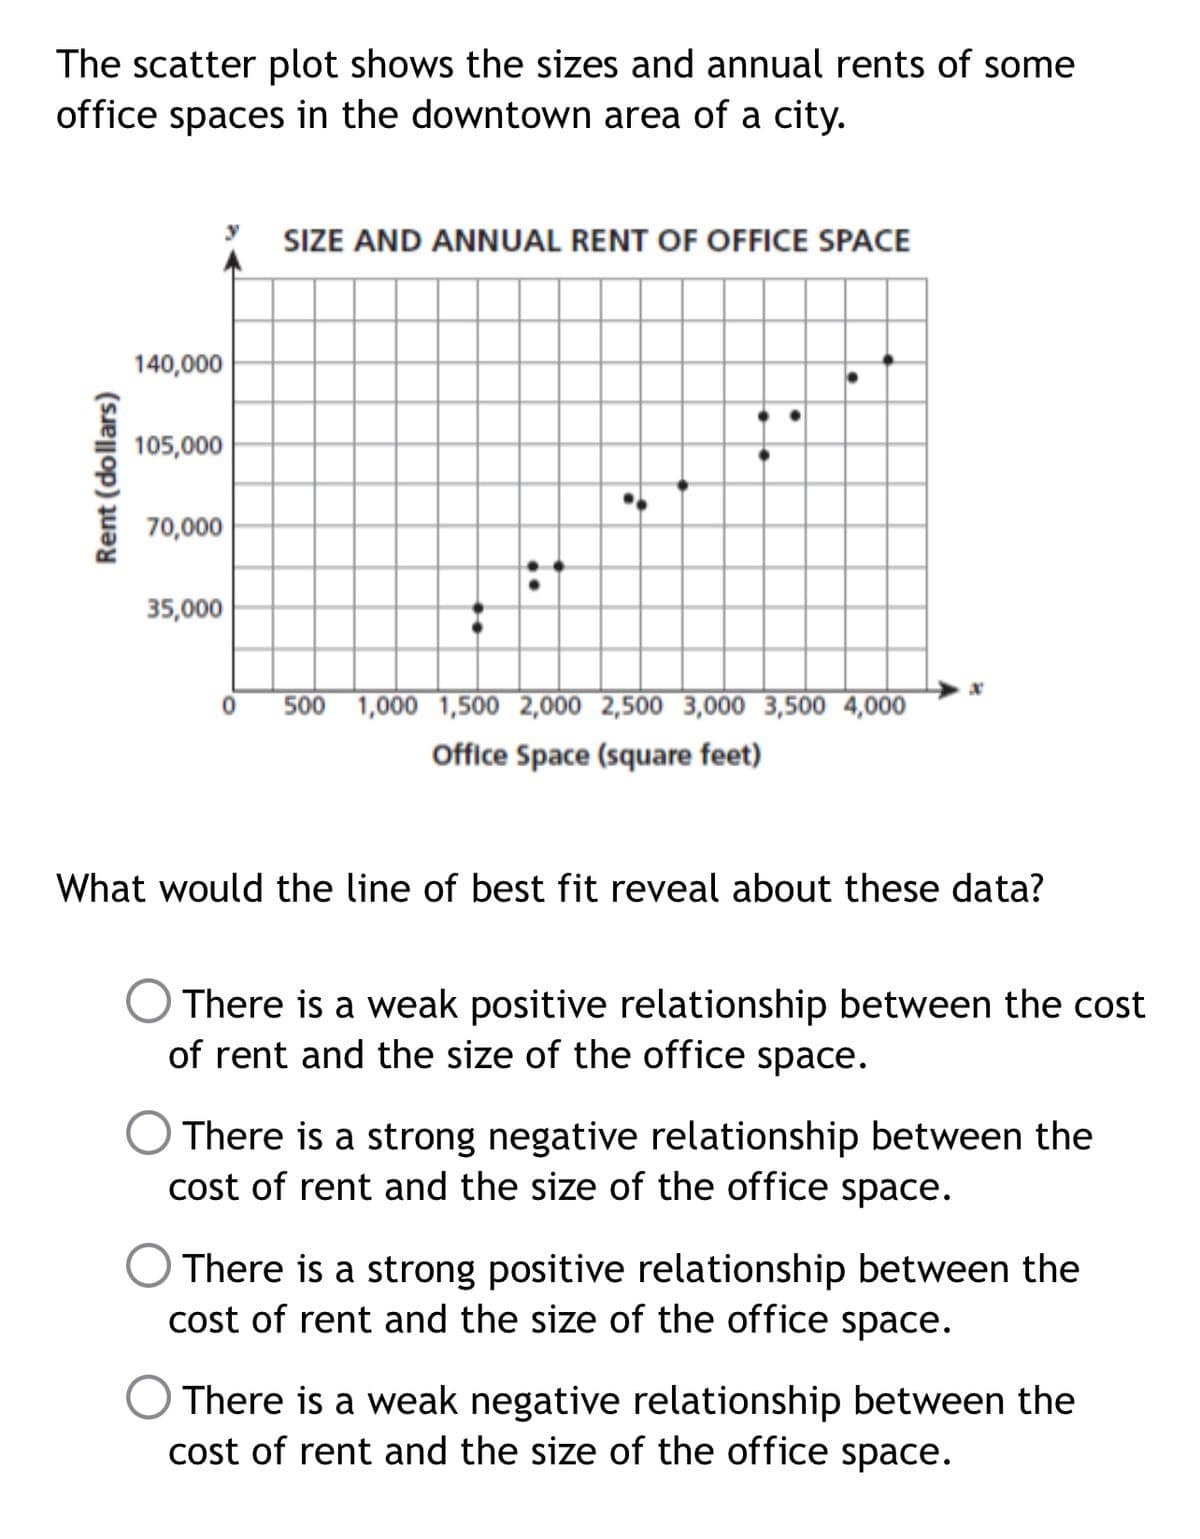 The scatter plot shows the sizes and annual rents of some
office spaces in the downtown area of a city.
Rent (dollars)
140,000
105,000
70,000
35,000
SIZE AND ANNUAL RENT OF OFFICE SPACE
0 500 1,000 1,500 2,000 2,500 3,000 3,500 4,000
Office Space (square feet)
What would the line of best fit reveal about these data?
There is a weak positive relationship between the cost
of rent and the size of the office space.
There is a strong negative relationship between the
cost of rent and the size of the office space.
There is a strong positive relationship between the
cost of rent and the size of the office space.
There is a weak negative relationship between the
cost of rent and the size of the office space.